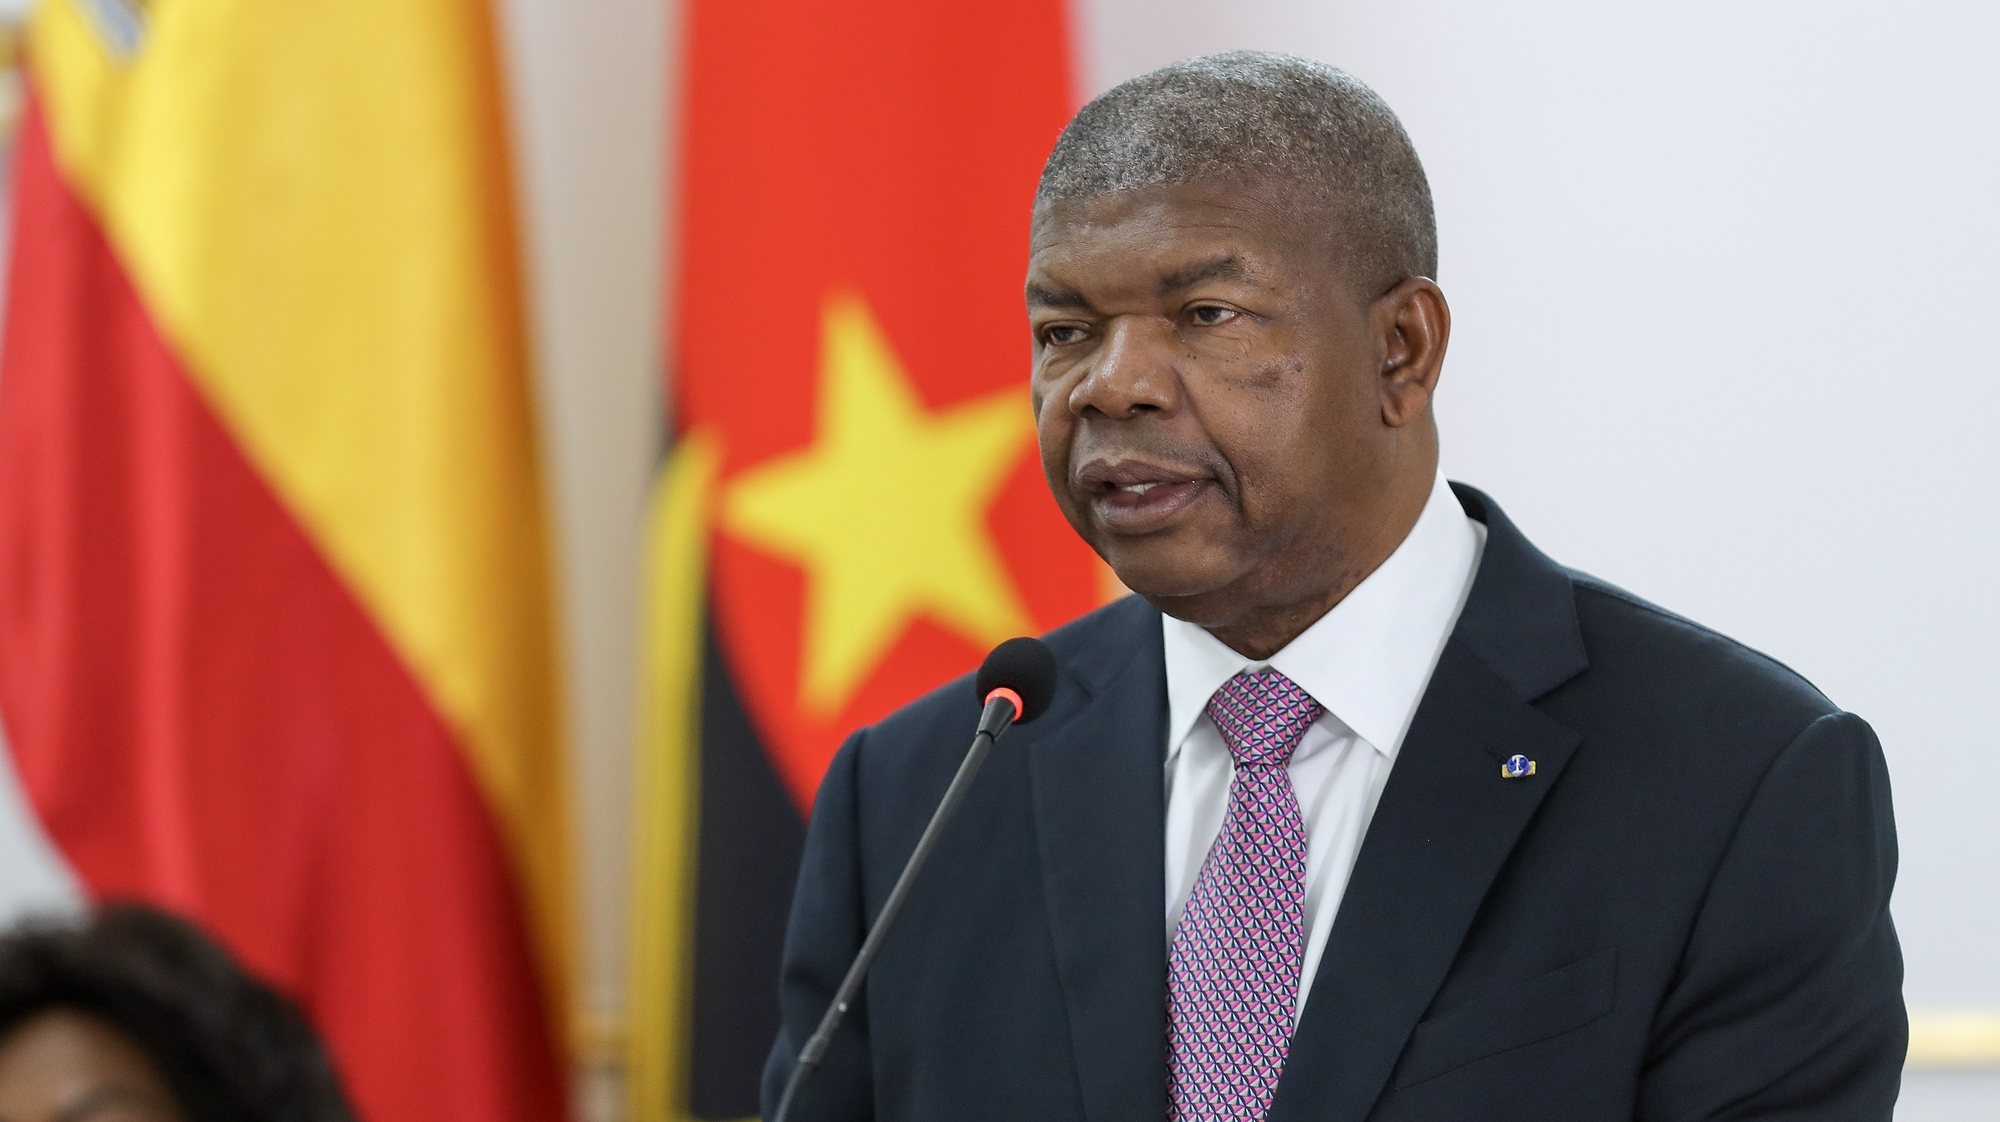 Angolan President, Joao Lourenco, delivers a speech after a meeting with the King of Spain, Felipe VI (unseen), at the Presidential Palace, Angola, Luanda, 7th February 2023. The Kings of Spain are on a three day official visit to Angola. AMPE ROGÉRIO/LUSA